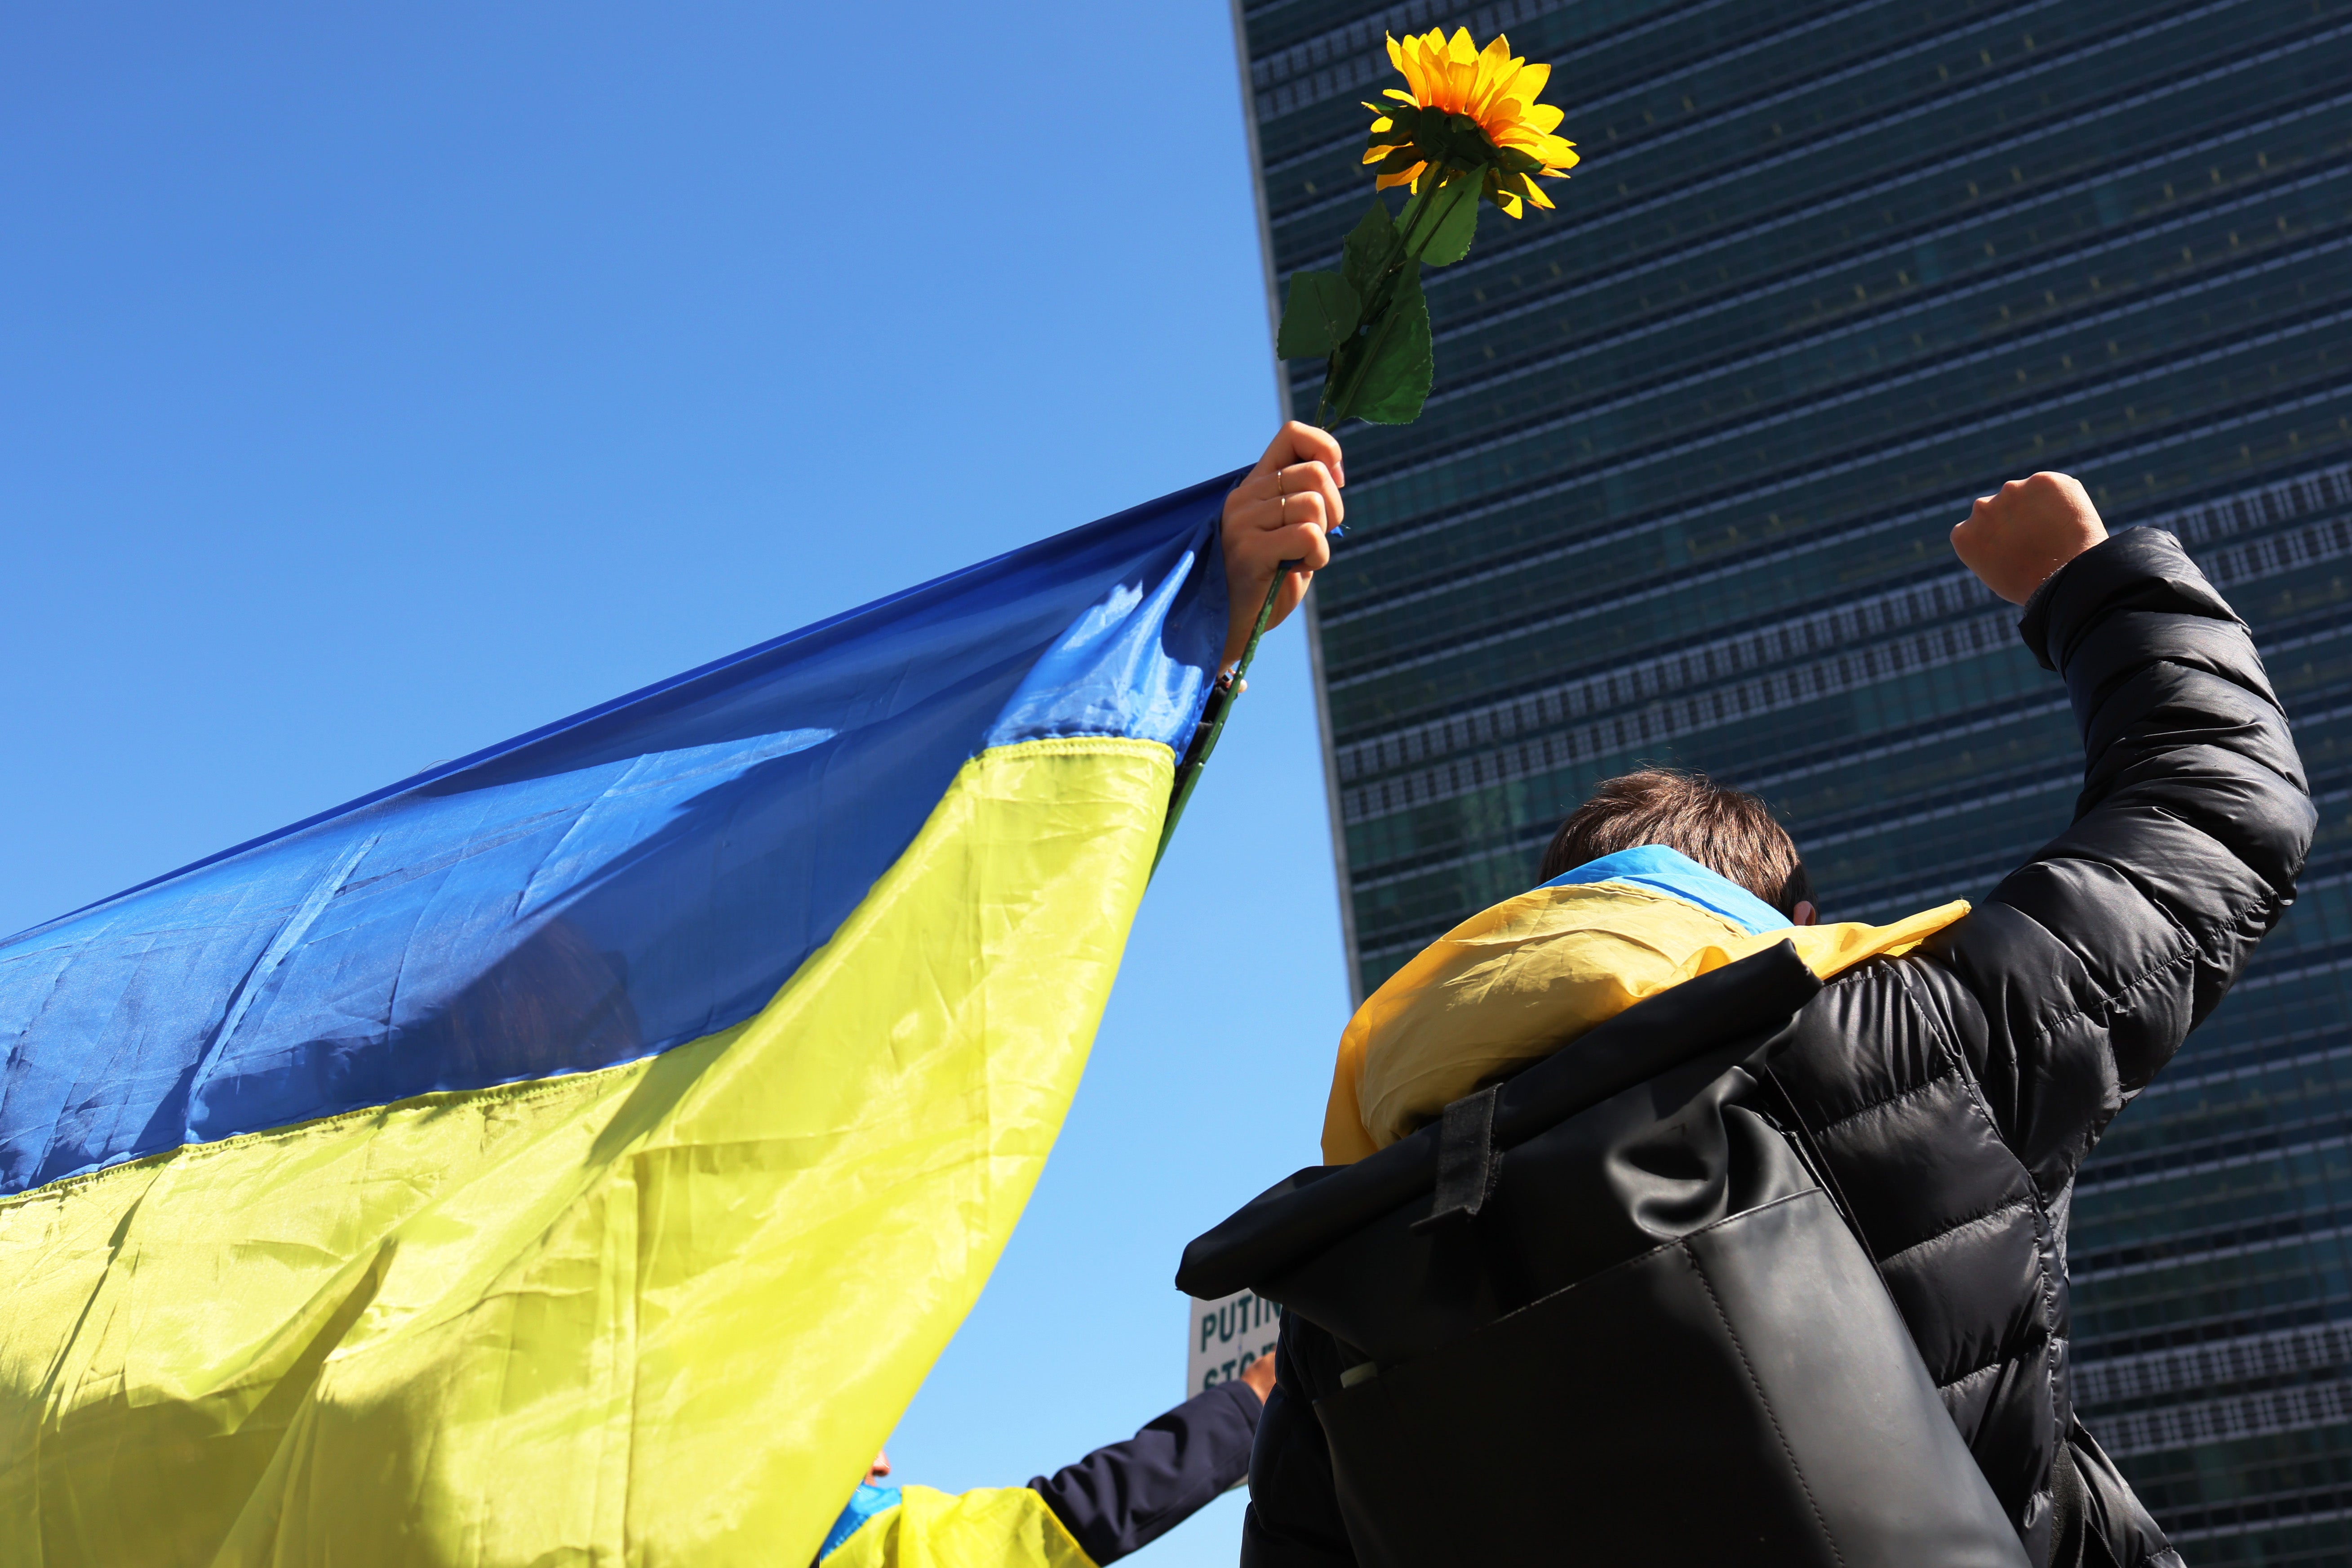 People gather to protest against the war in Ukraine in front of the United Nations headquarters in New York, 2 March 2022